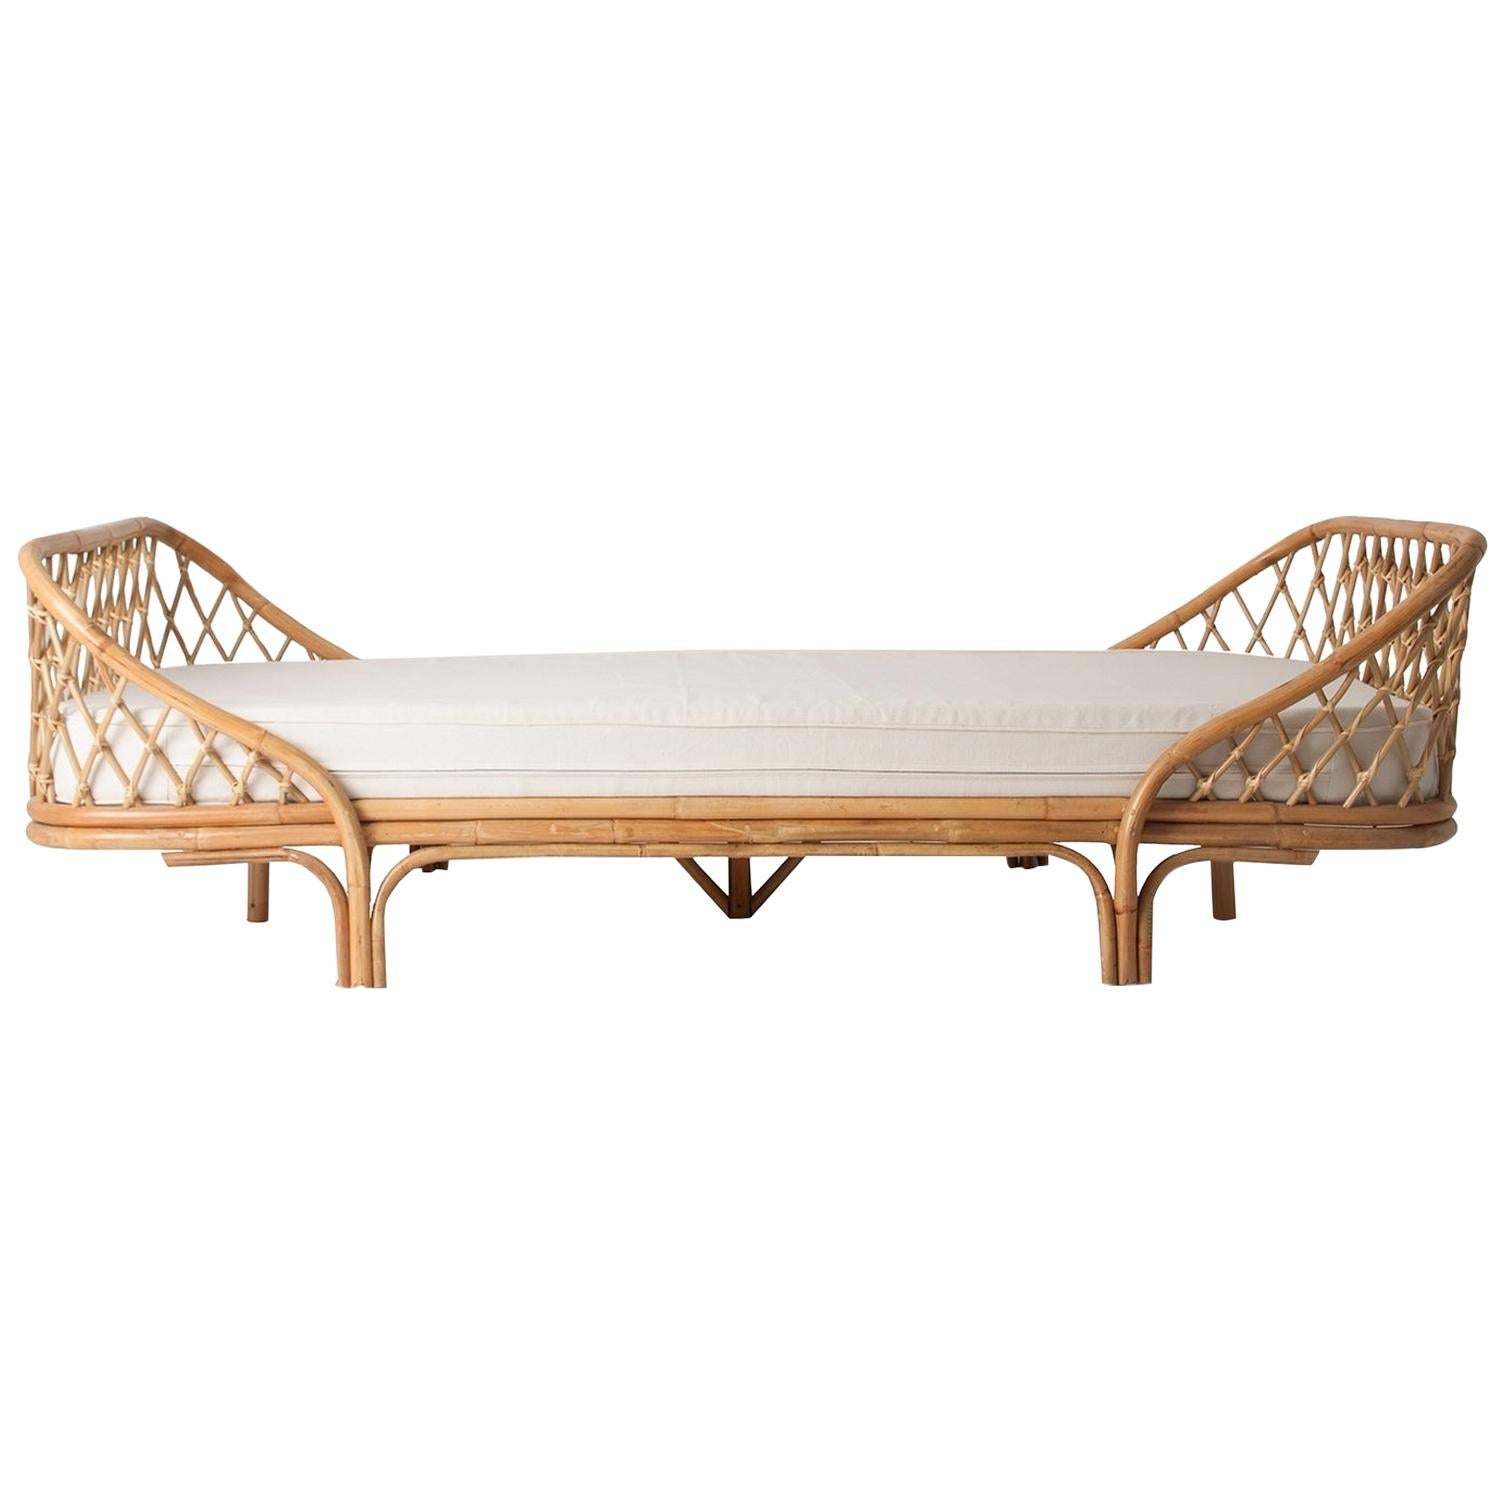 1960s Style Rattan Daybed